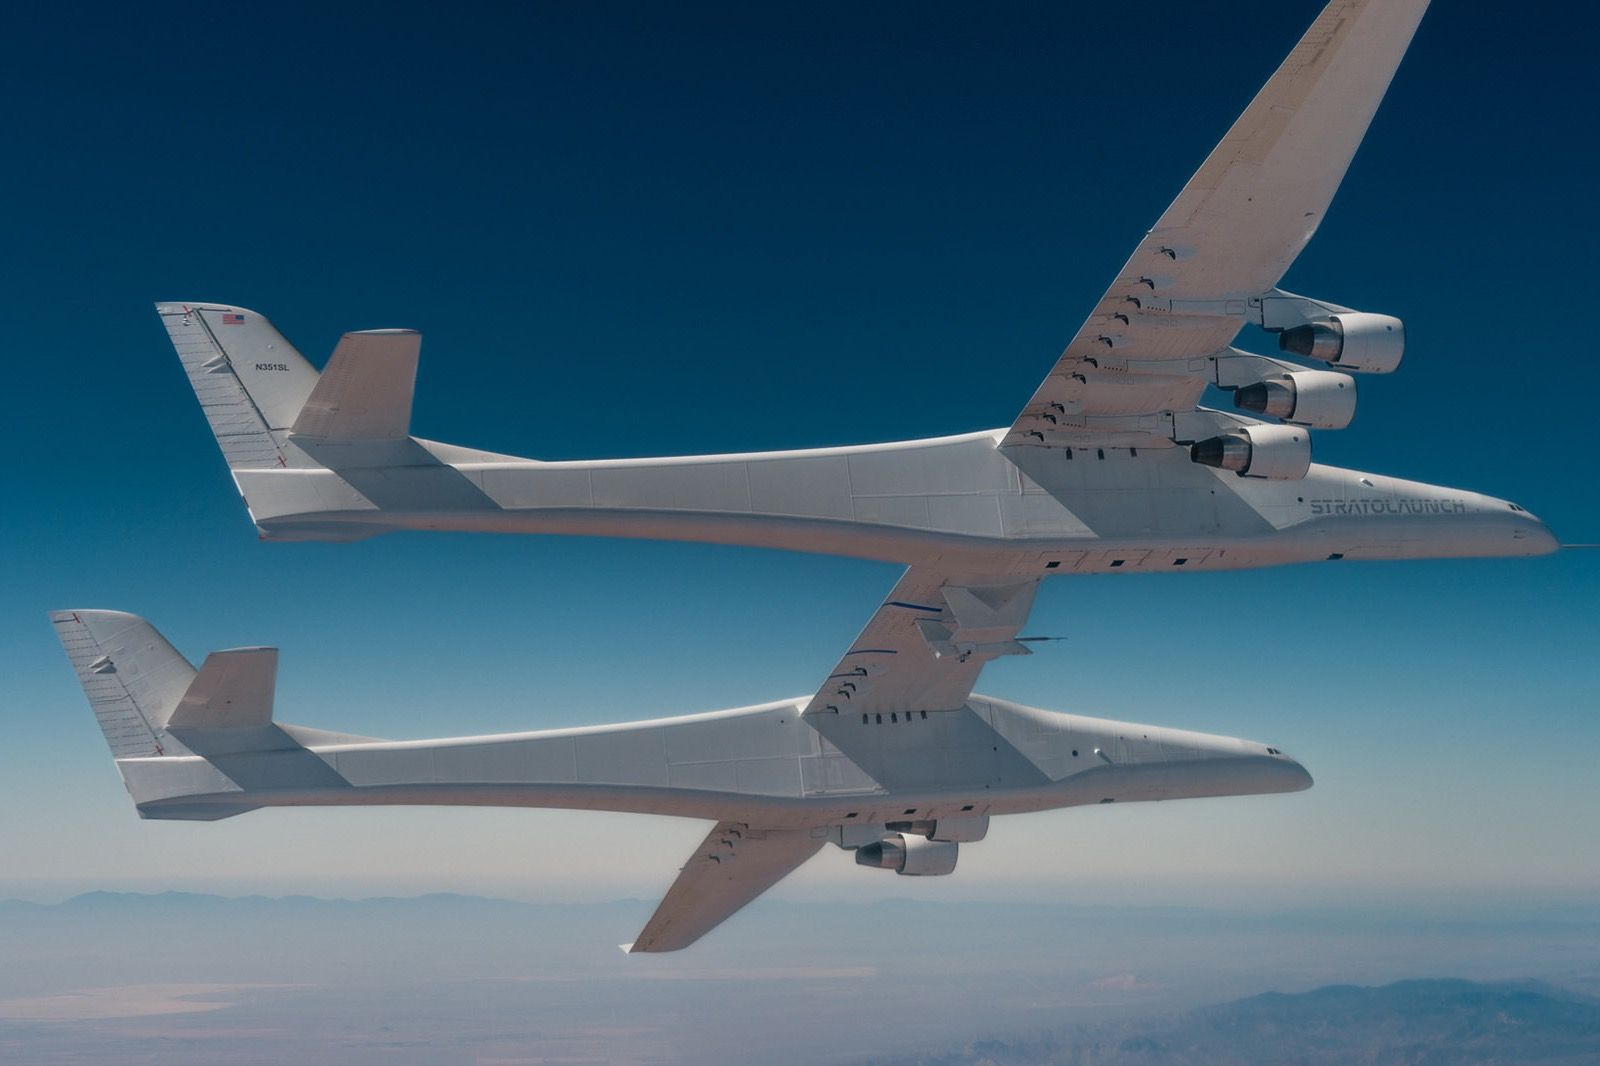 Stratolaunch Roc on a test flight